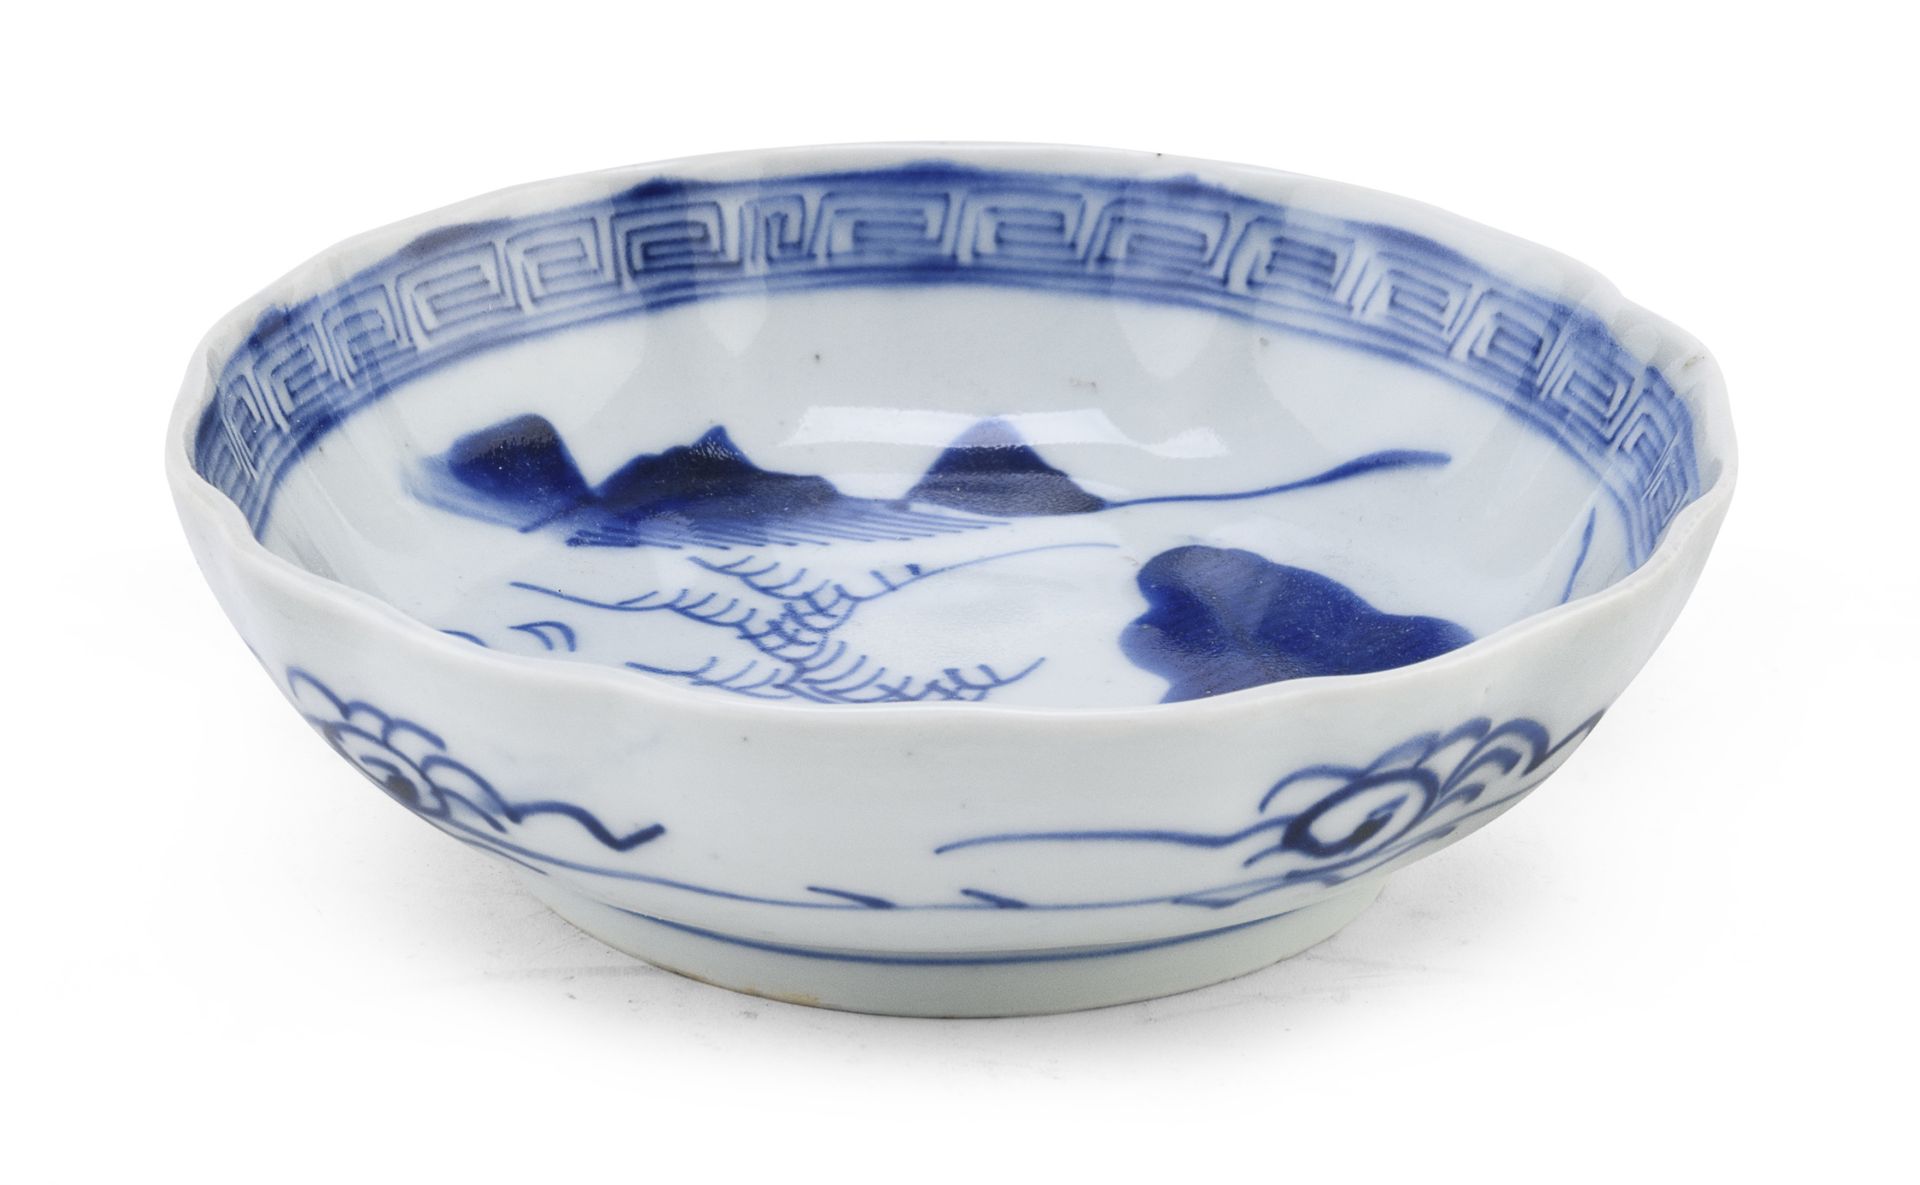 A SMALL JAPANESE WHITE AND BLUE PORCELAIN BOWL 19TH CENTURY.